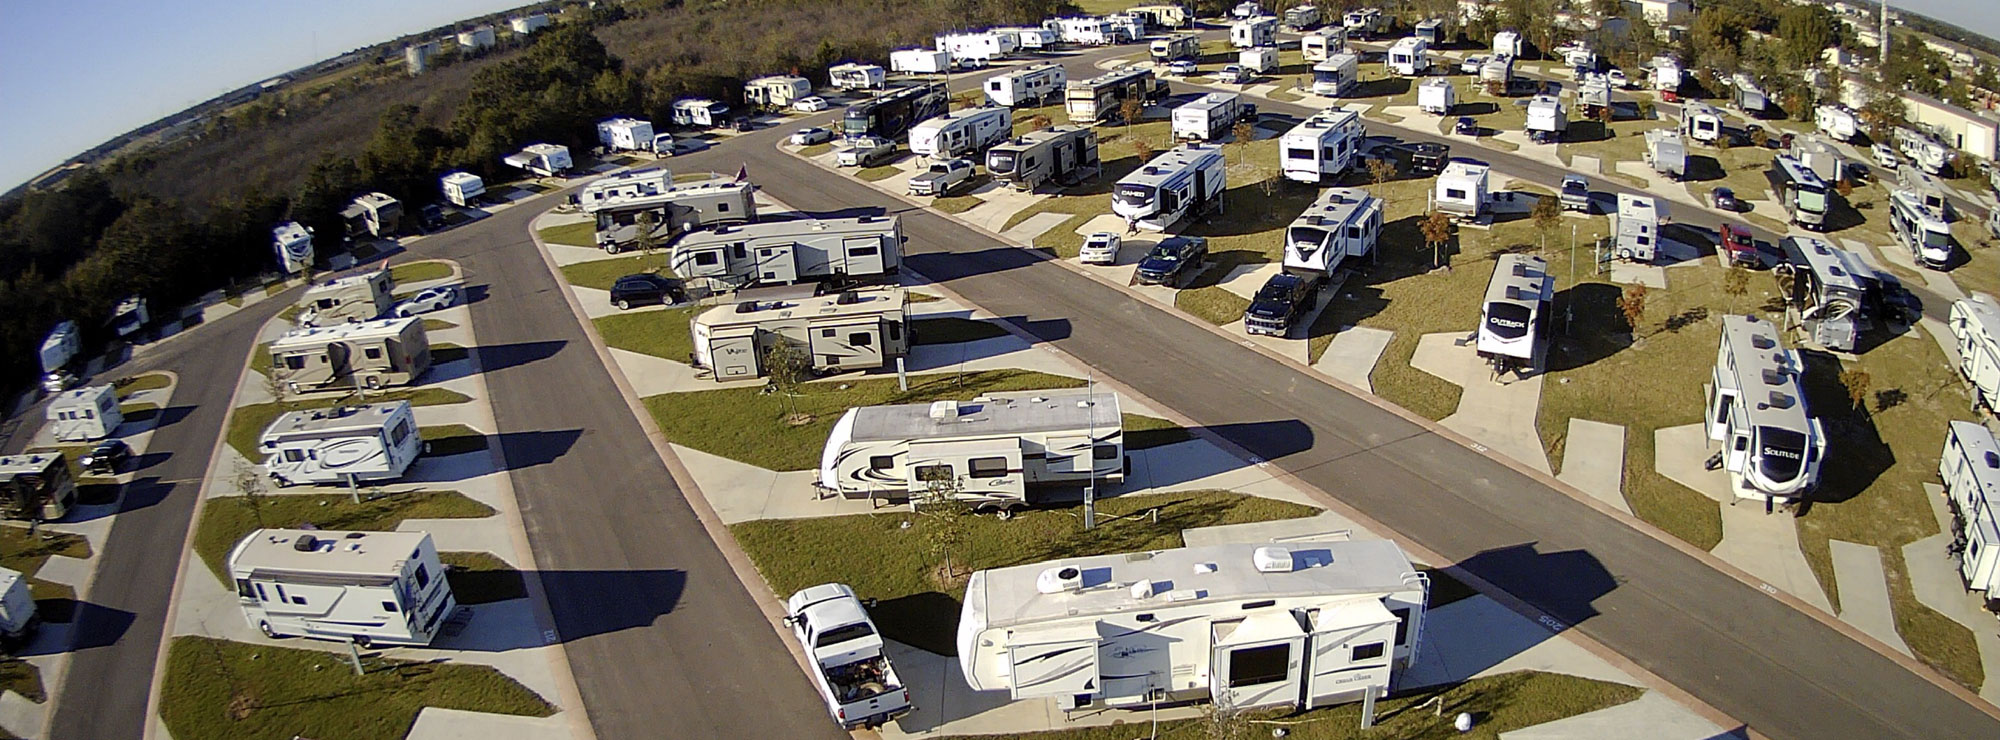 A bird's eye view of Hardy's Resort RV Park in College Station